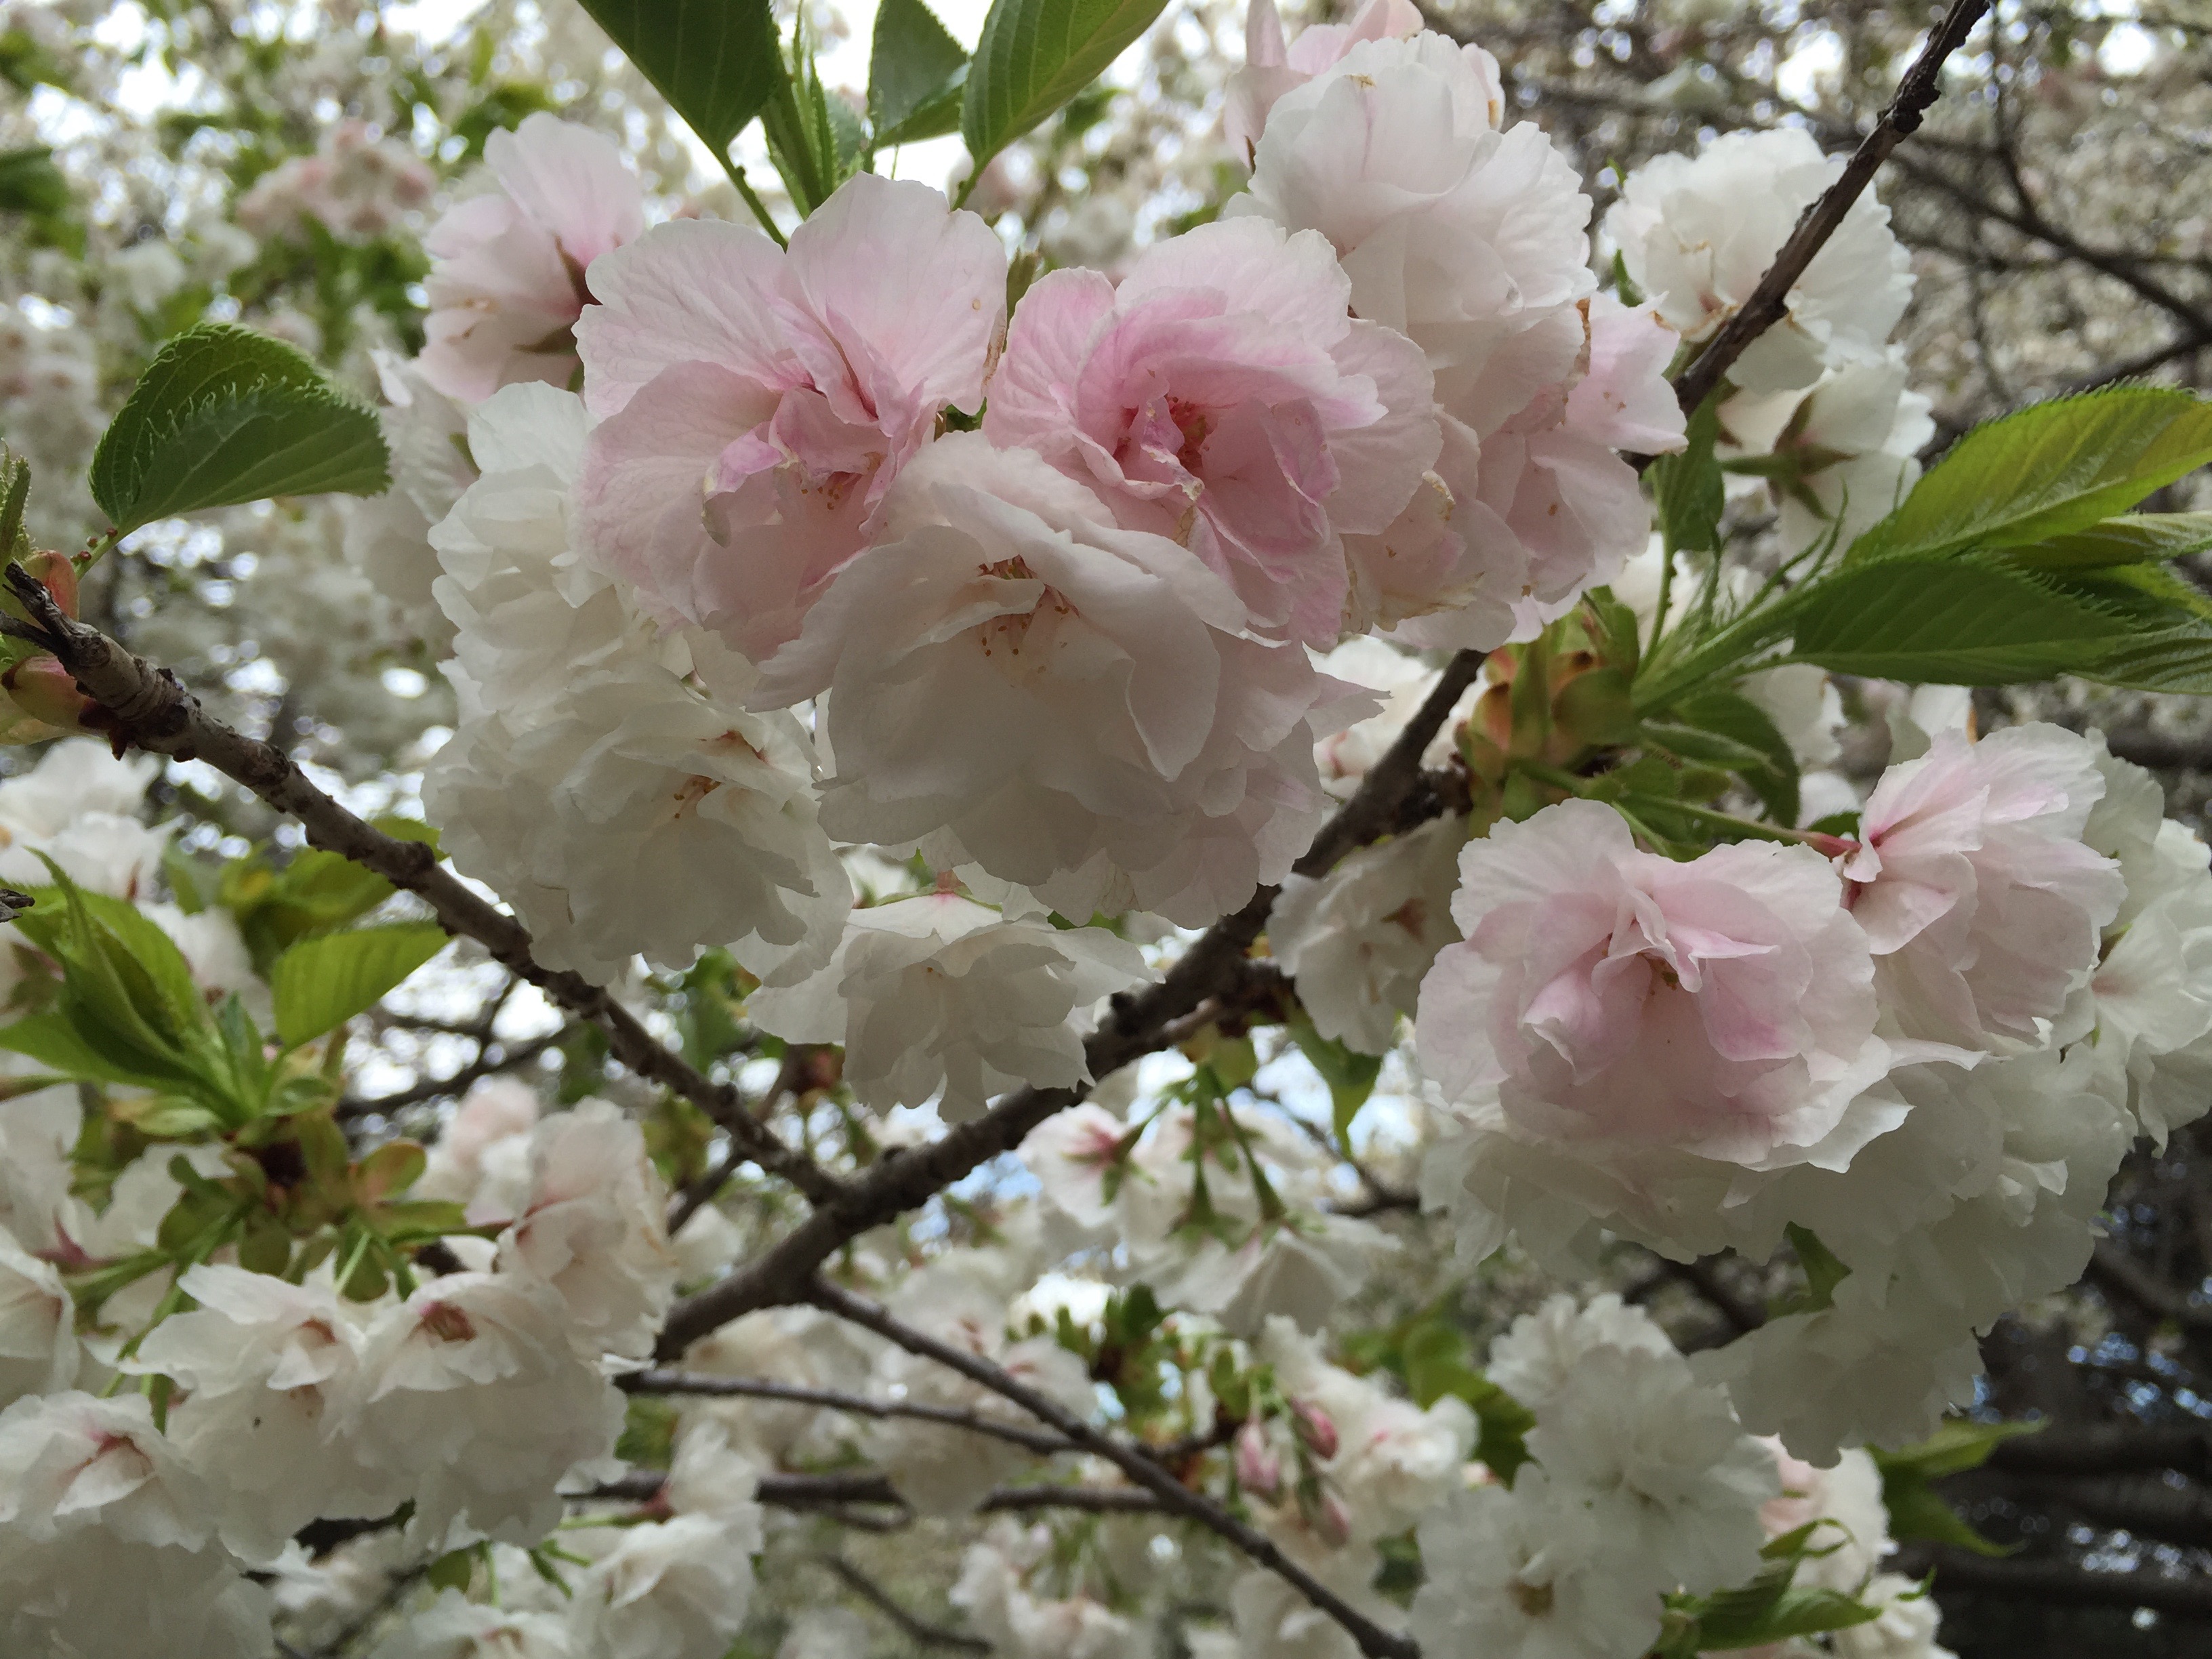 Vienna,Virginia- The Best Places in the World to See Cherry Blossoms www.casualtravelist.com